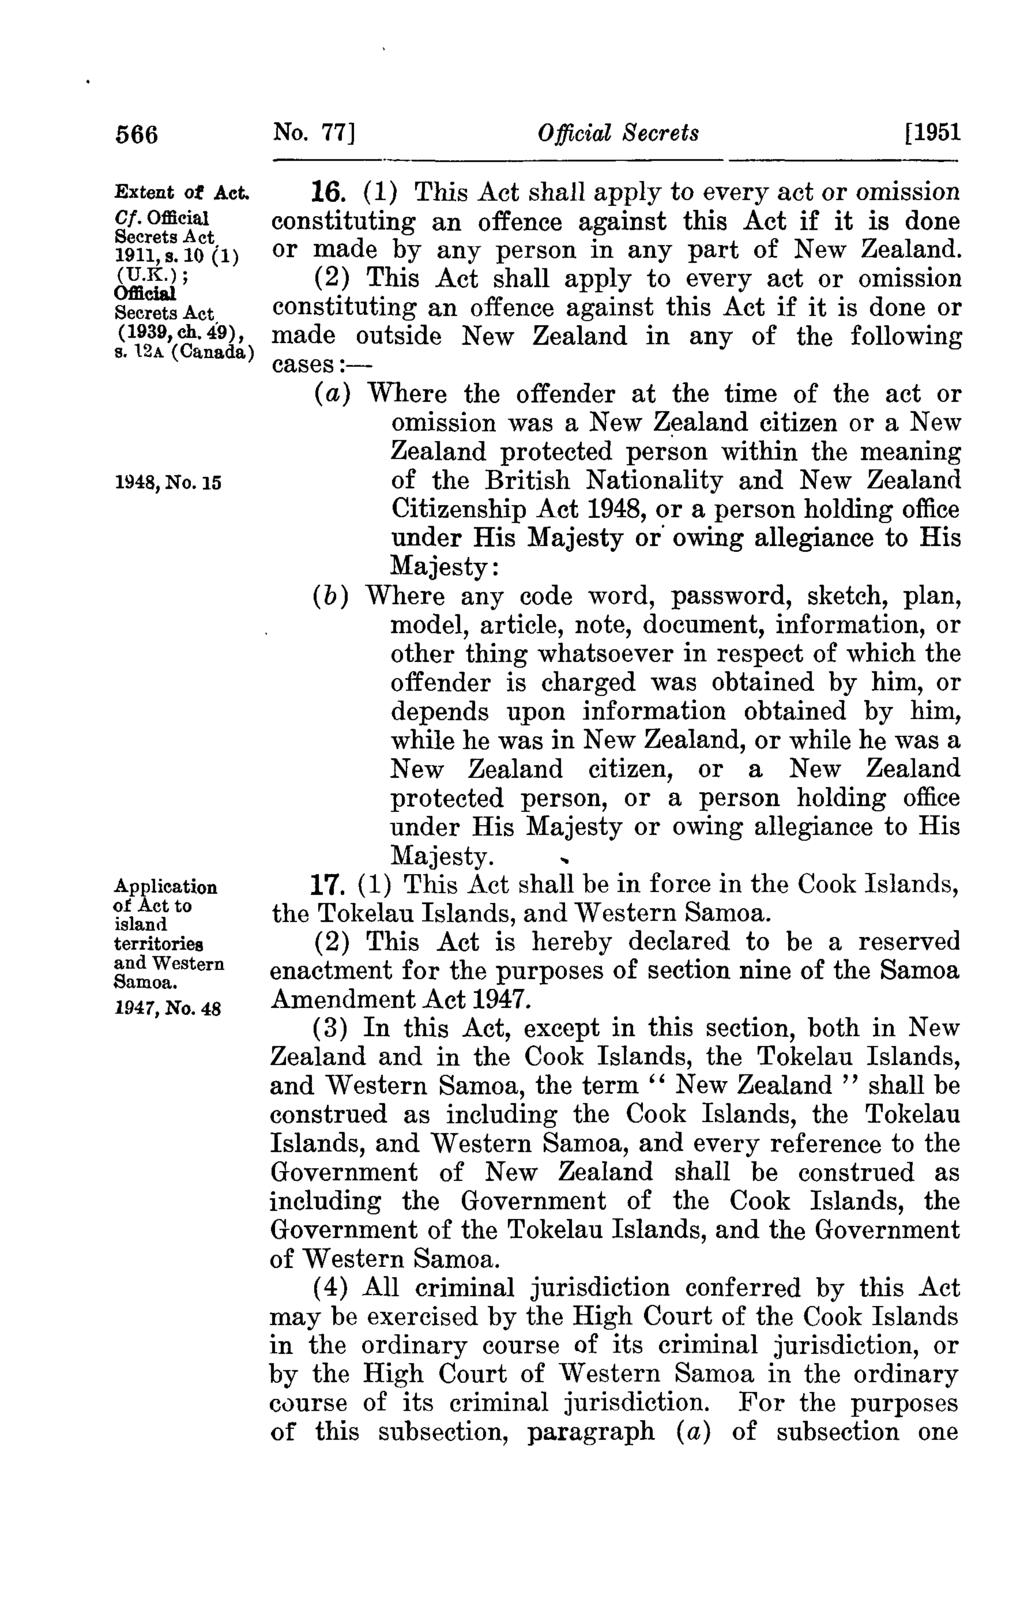 566 No. 77J Official Secrets [1951 Extent of Act. 1911, s.10 (1) ; Official (1939, ch. 49), s. 12A (Canada) 1948, No. 15 Application of Act to island territories and Western Samoa. 1947, No. 48 16.